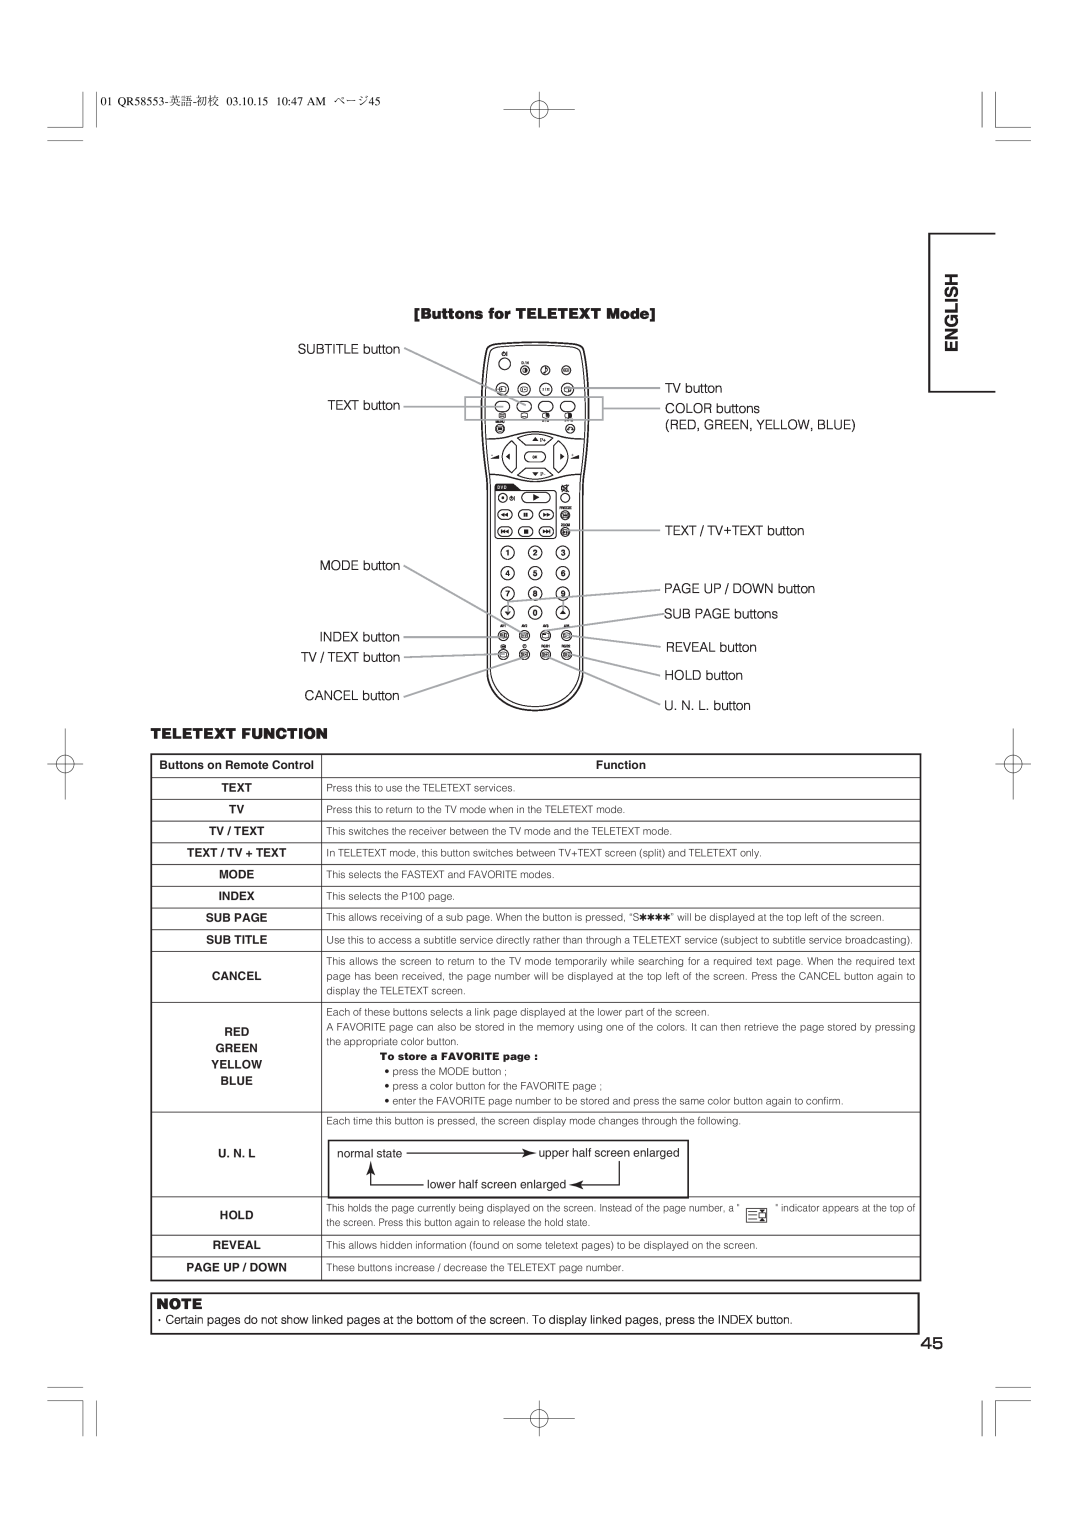 Hitachi 42PD5000 user manual English, Buttons for TELETEXT Mode, Teletext Function 